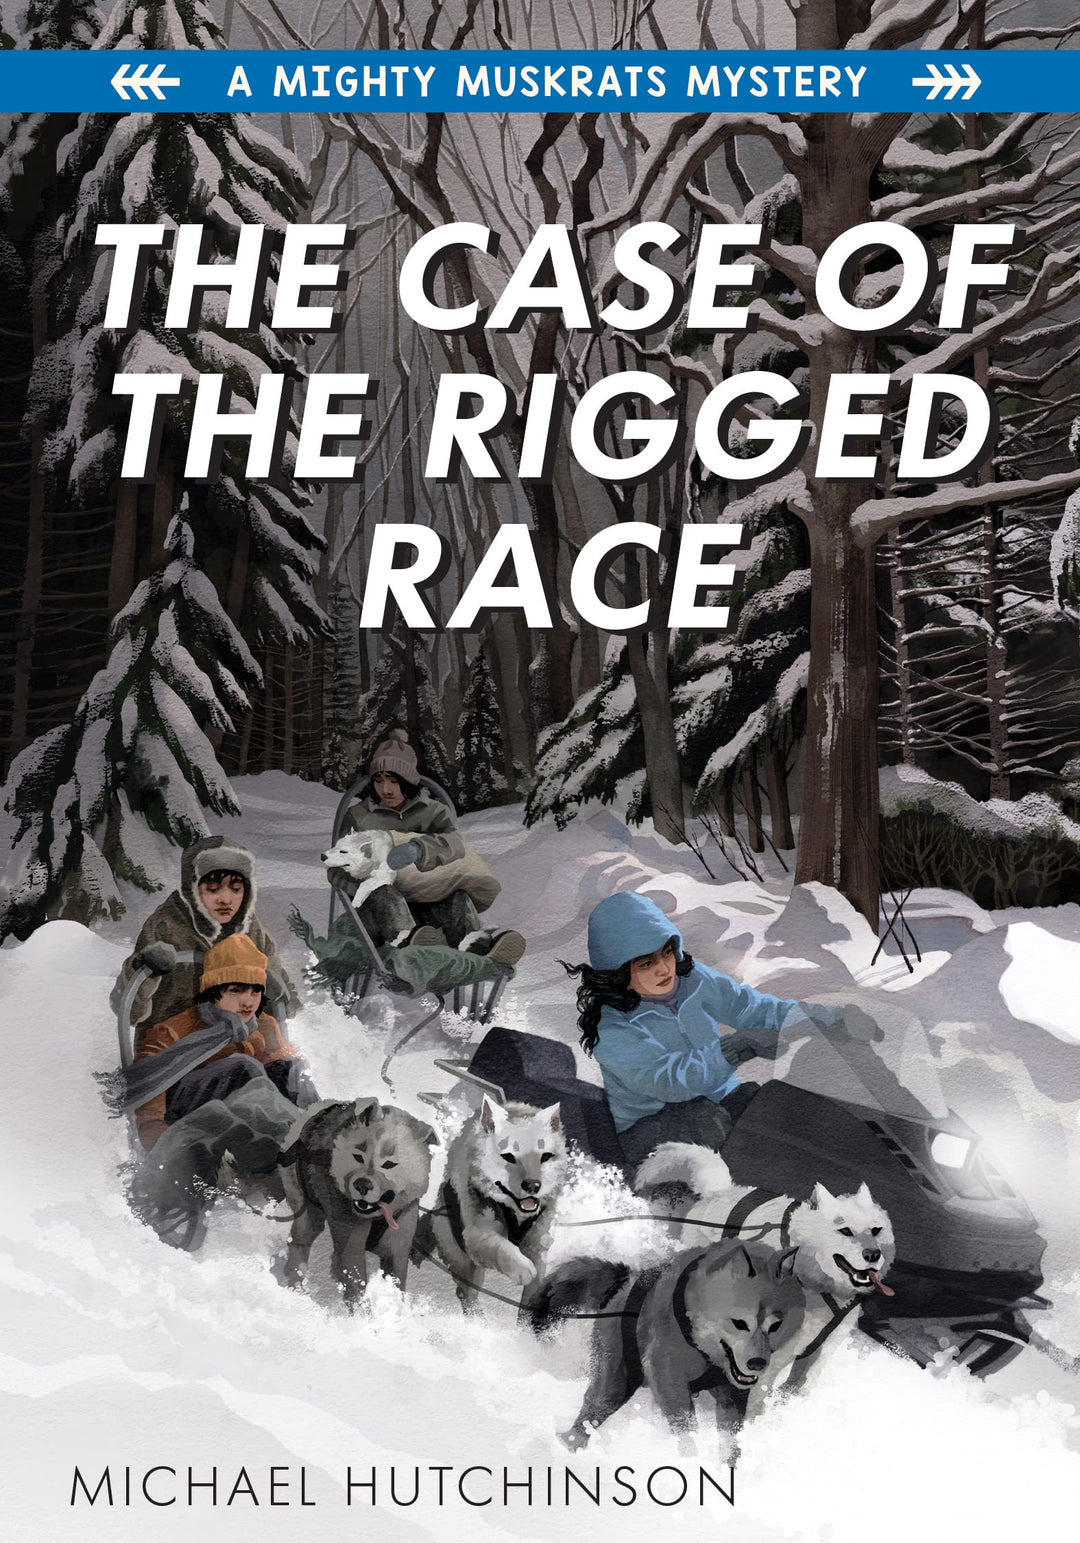 The Case of the Rigged Race by Michael Hutchinson